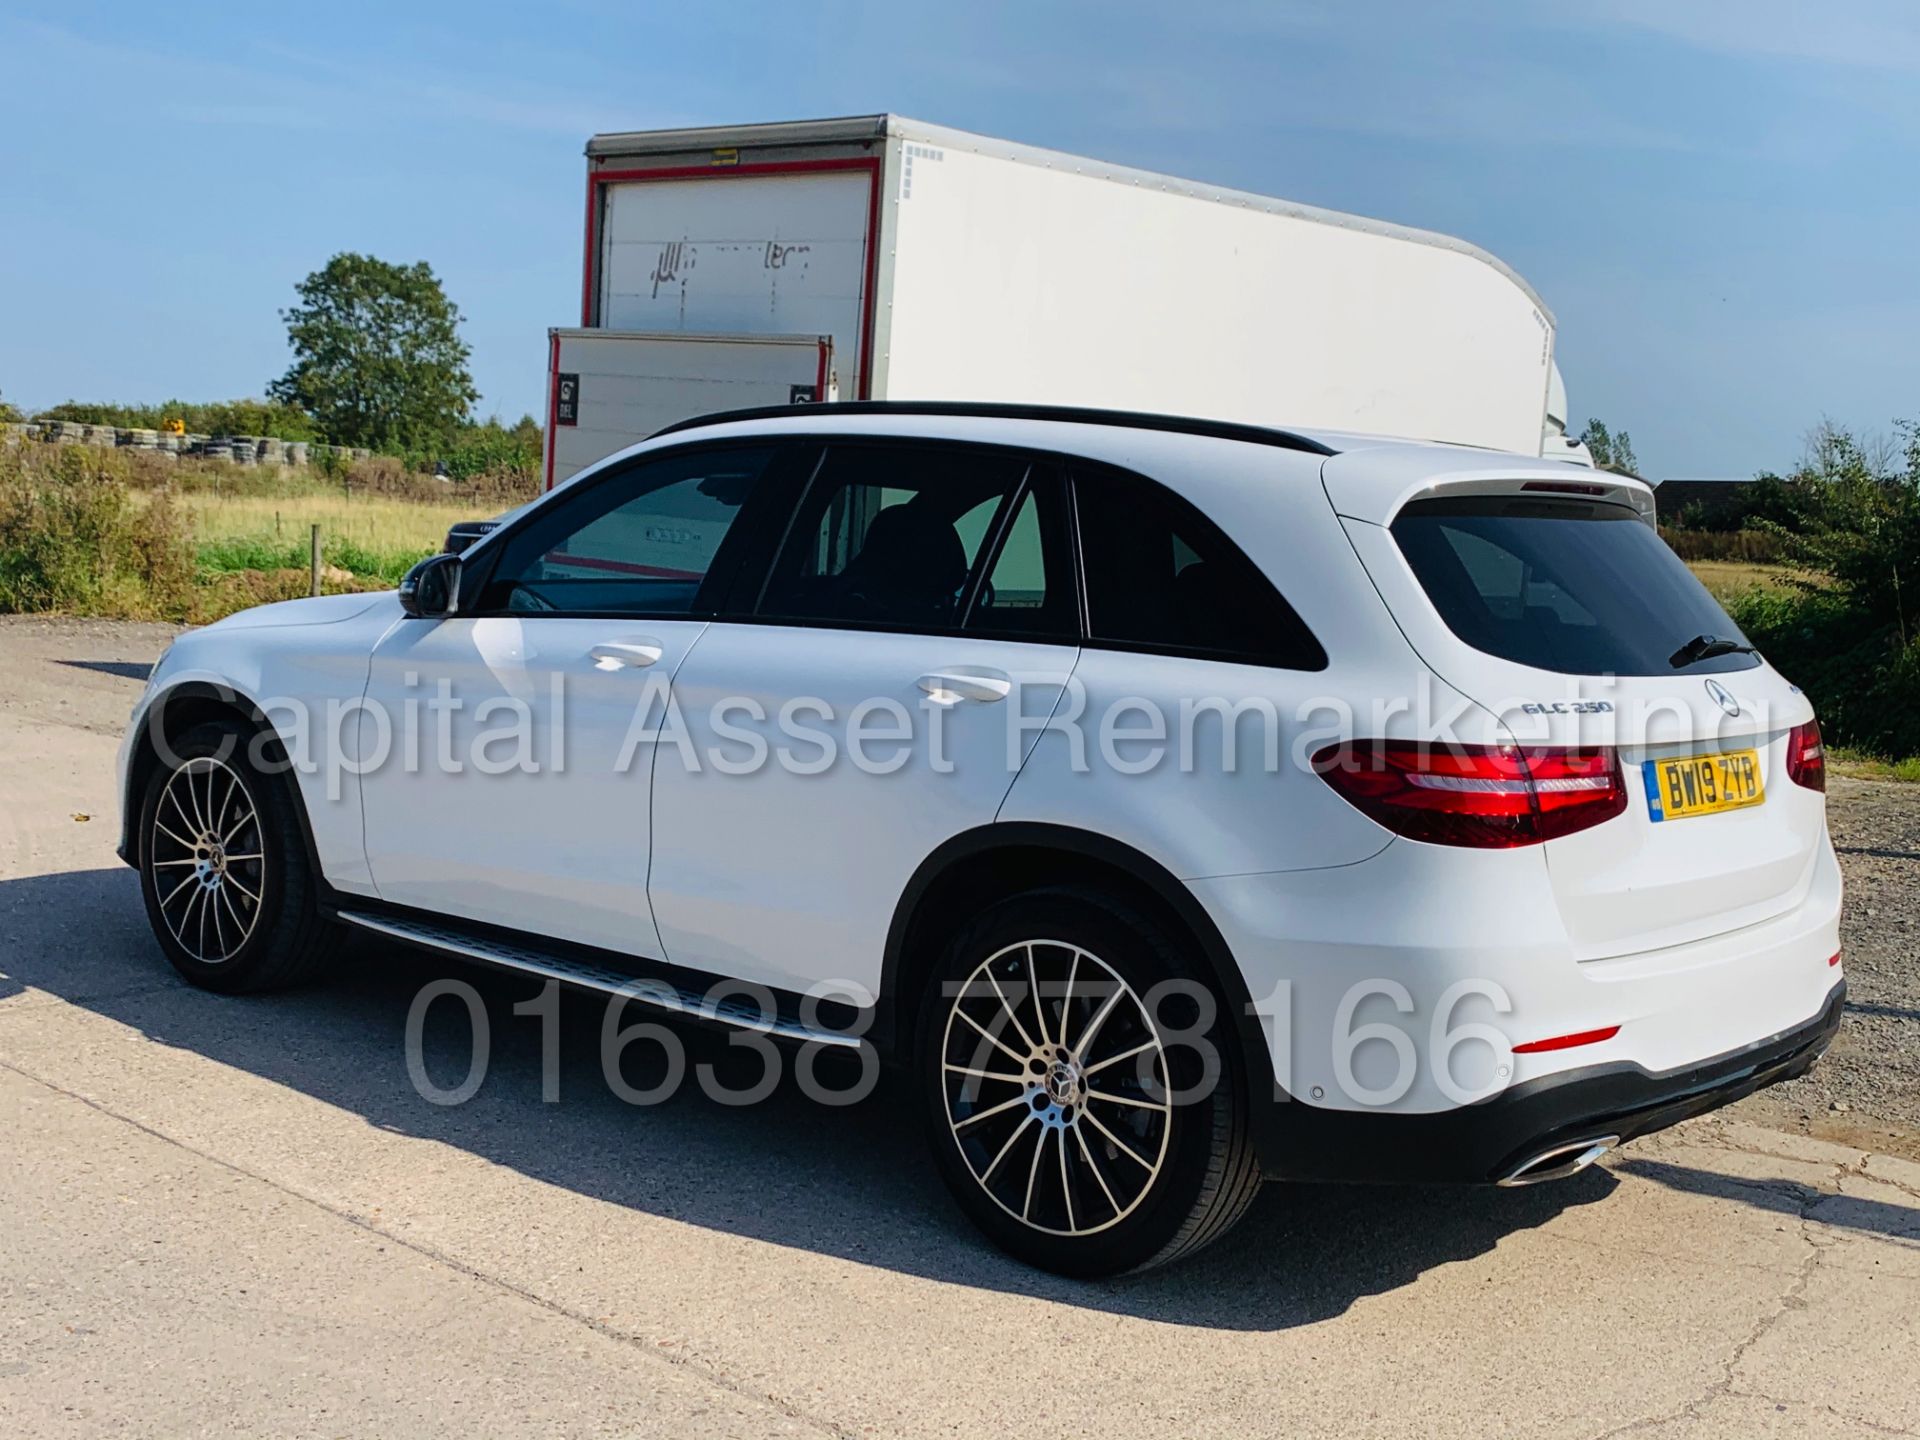 (On Sale) MERCEDES-BENZ GLC 250 *AMG - NIGHT EDITION* SUV (2019) '9G TRONIC - 4-MATIC' *HUGE SPEC* - Image 9 of 53